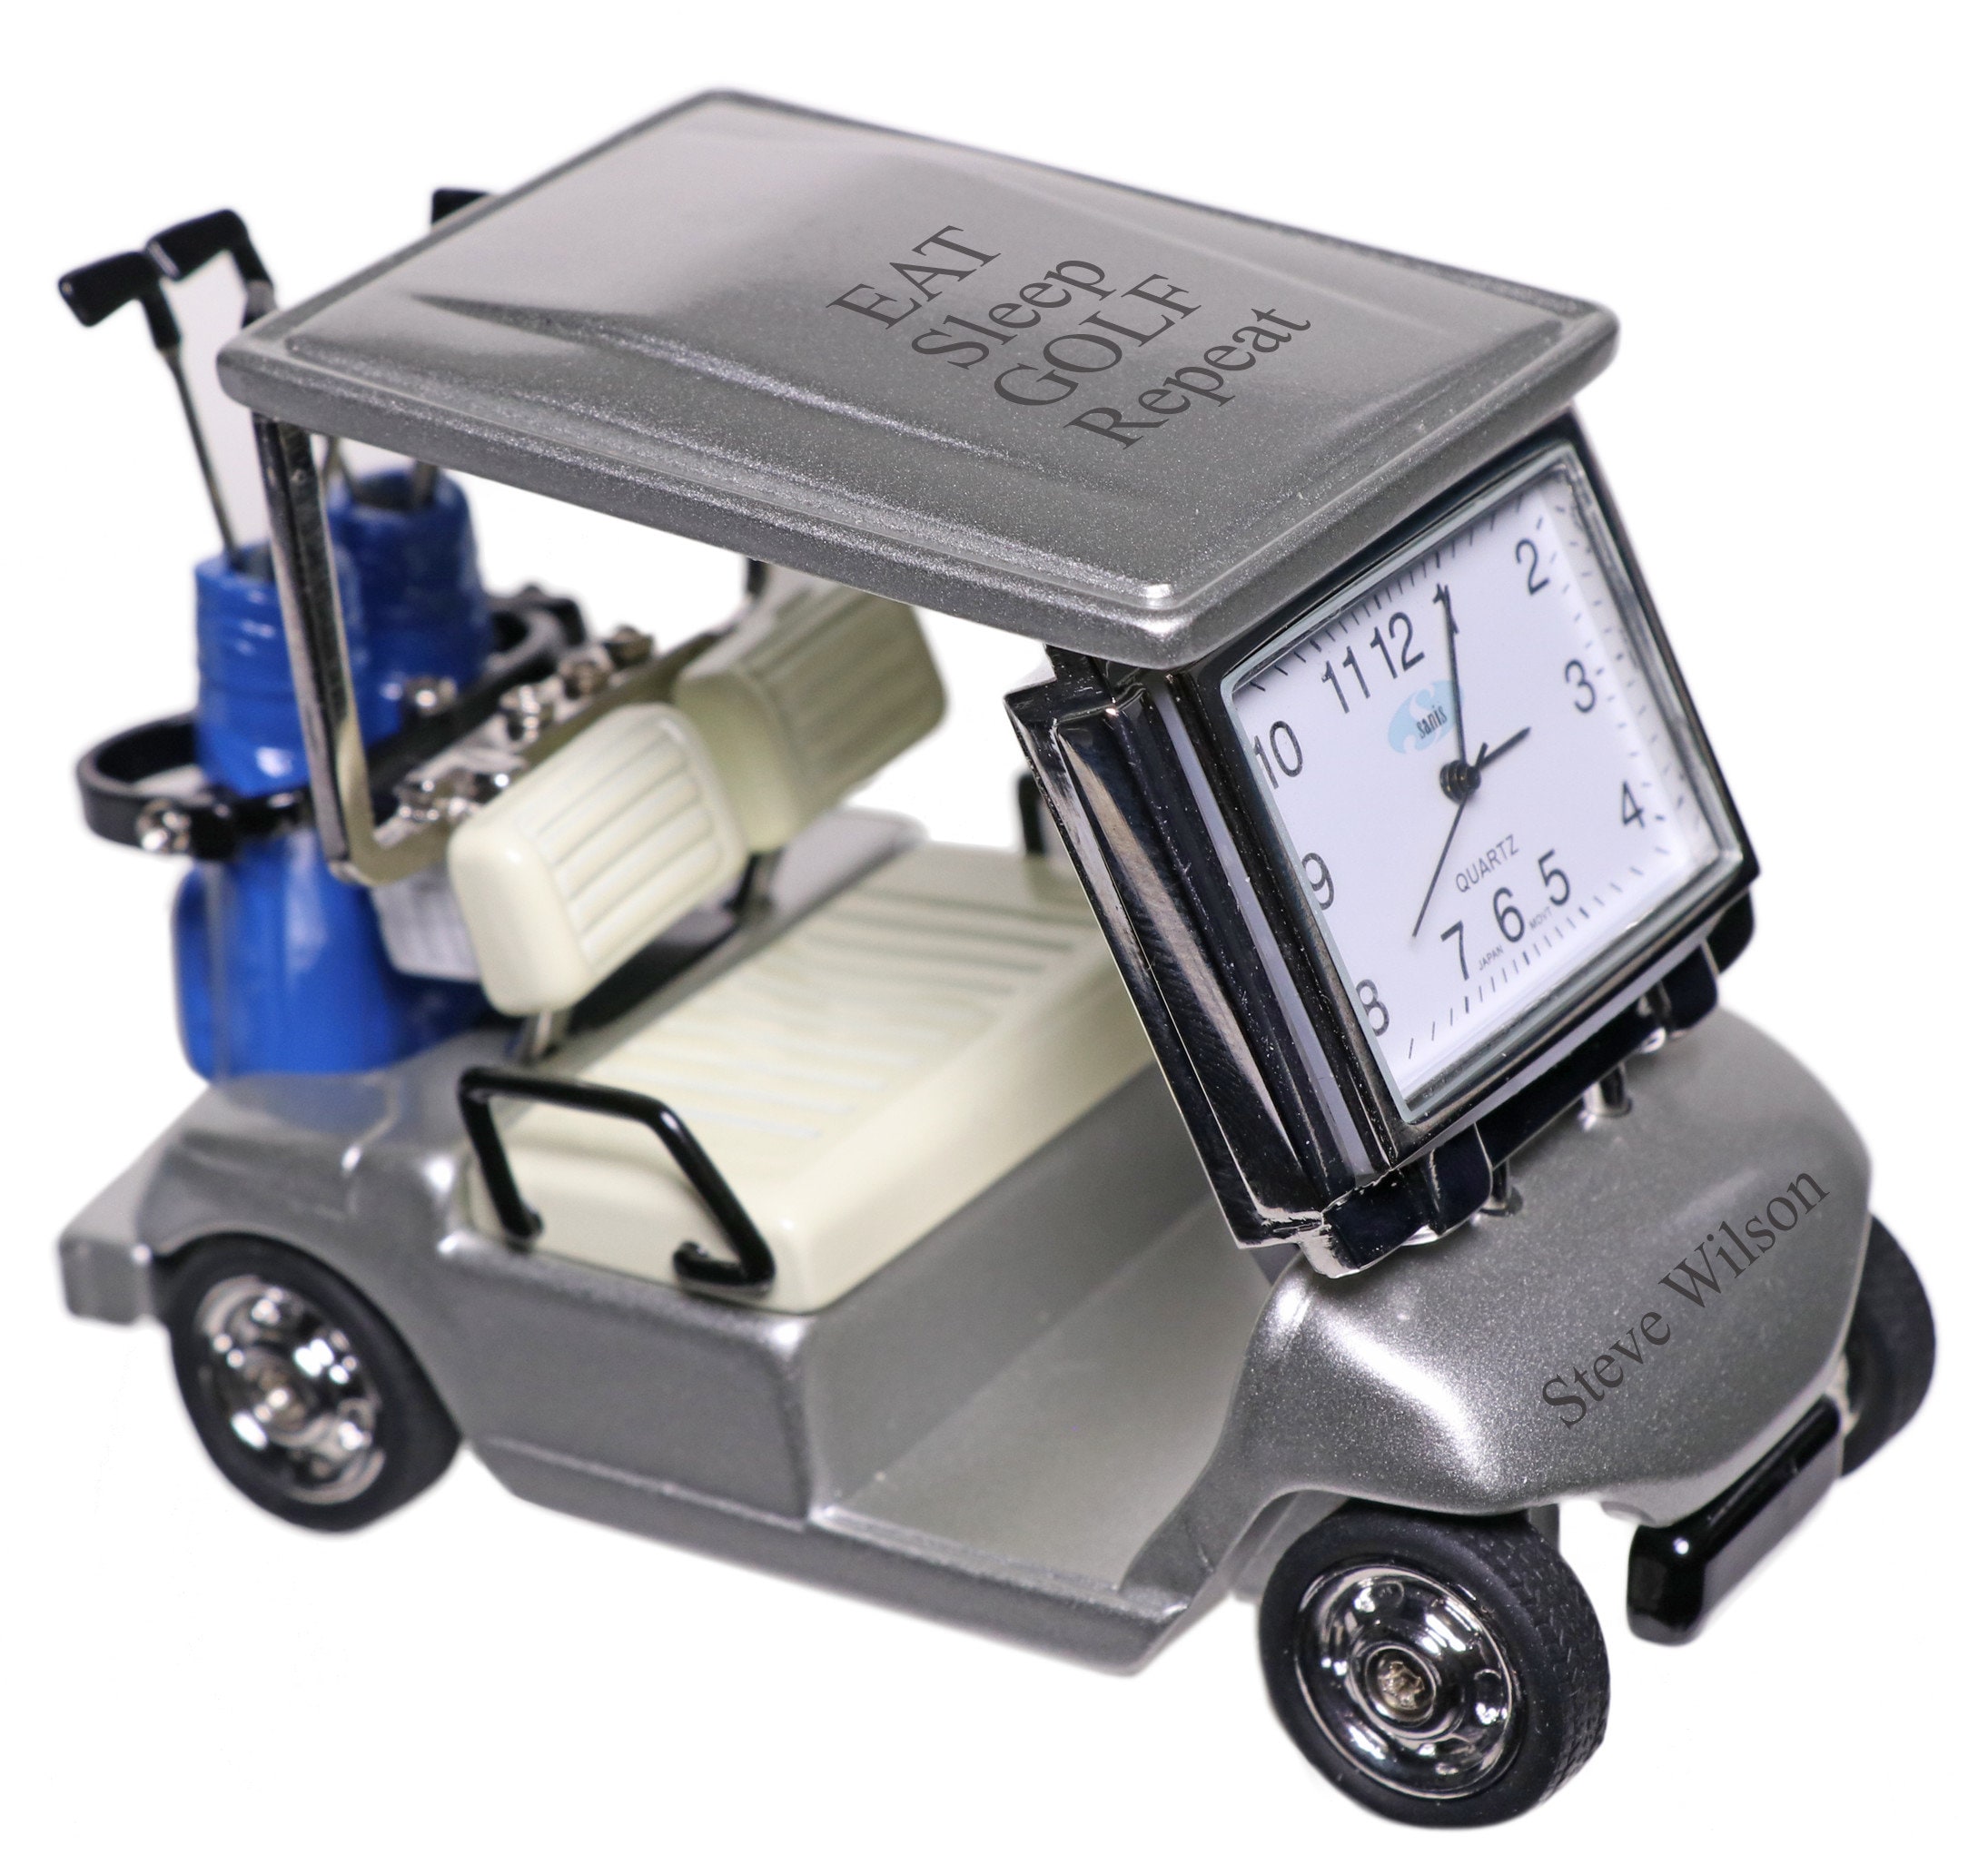 Promotional 5 Inch Die-Cast Metal Golf Cart Toys - Toys - Fun, Games & Music